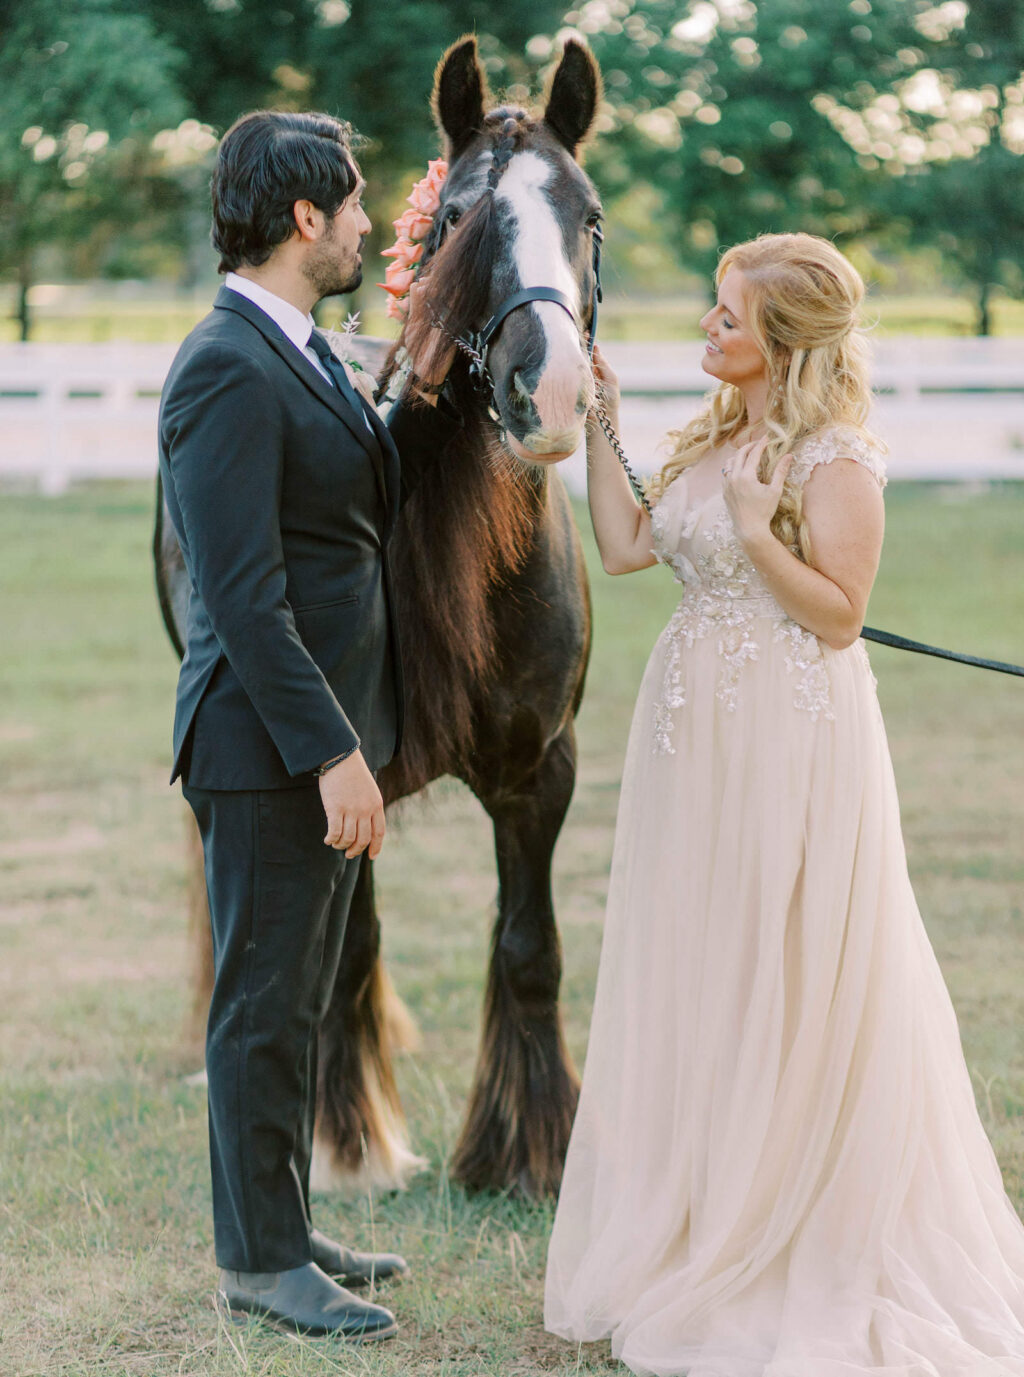 Bride Wearing Blush Pink Boho Off White Flowy Lace High Neck Wedding Dress and Groom Petting Brown and White Horse | Tampa Bay Wedding Venue Mill Pond Estate